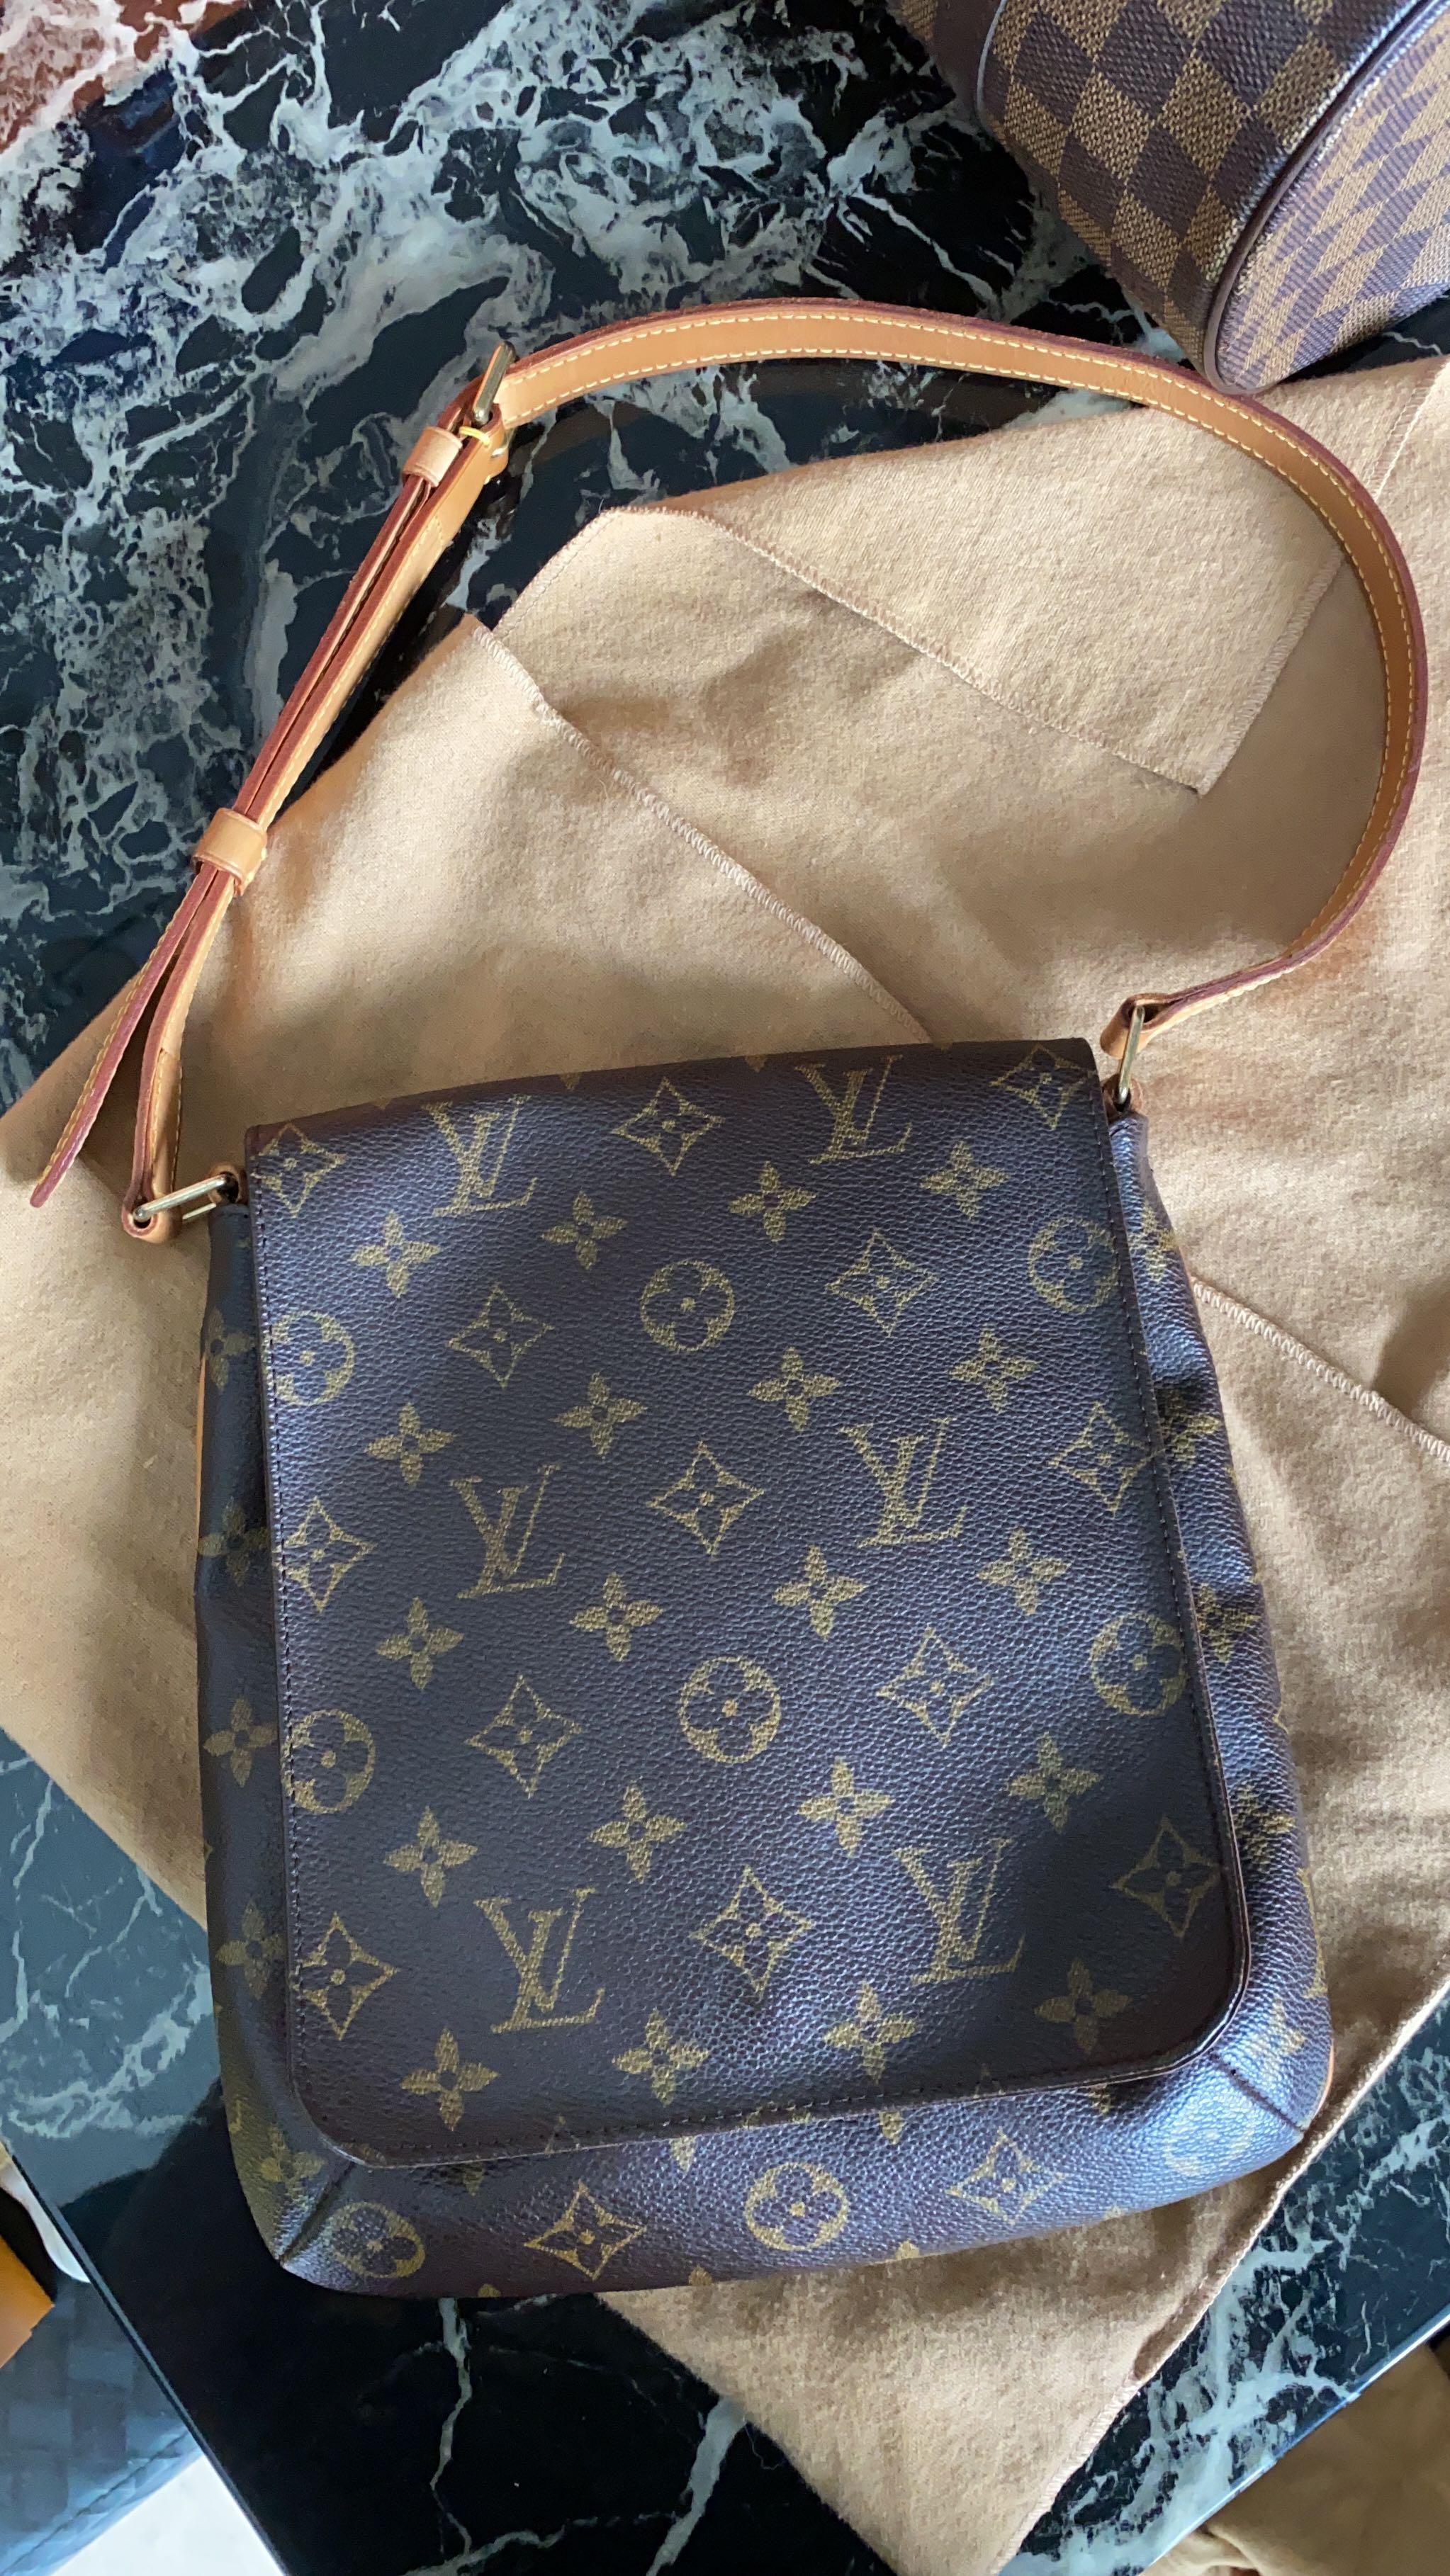 Pre-Owned Louis Vuitton Musette Bag-2235RY65 